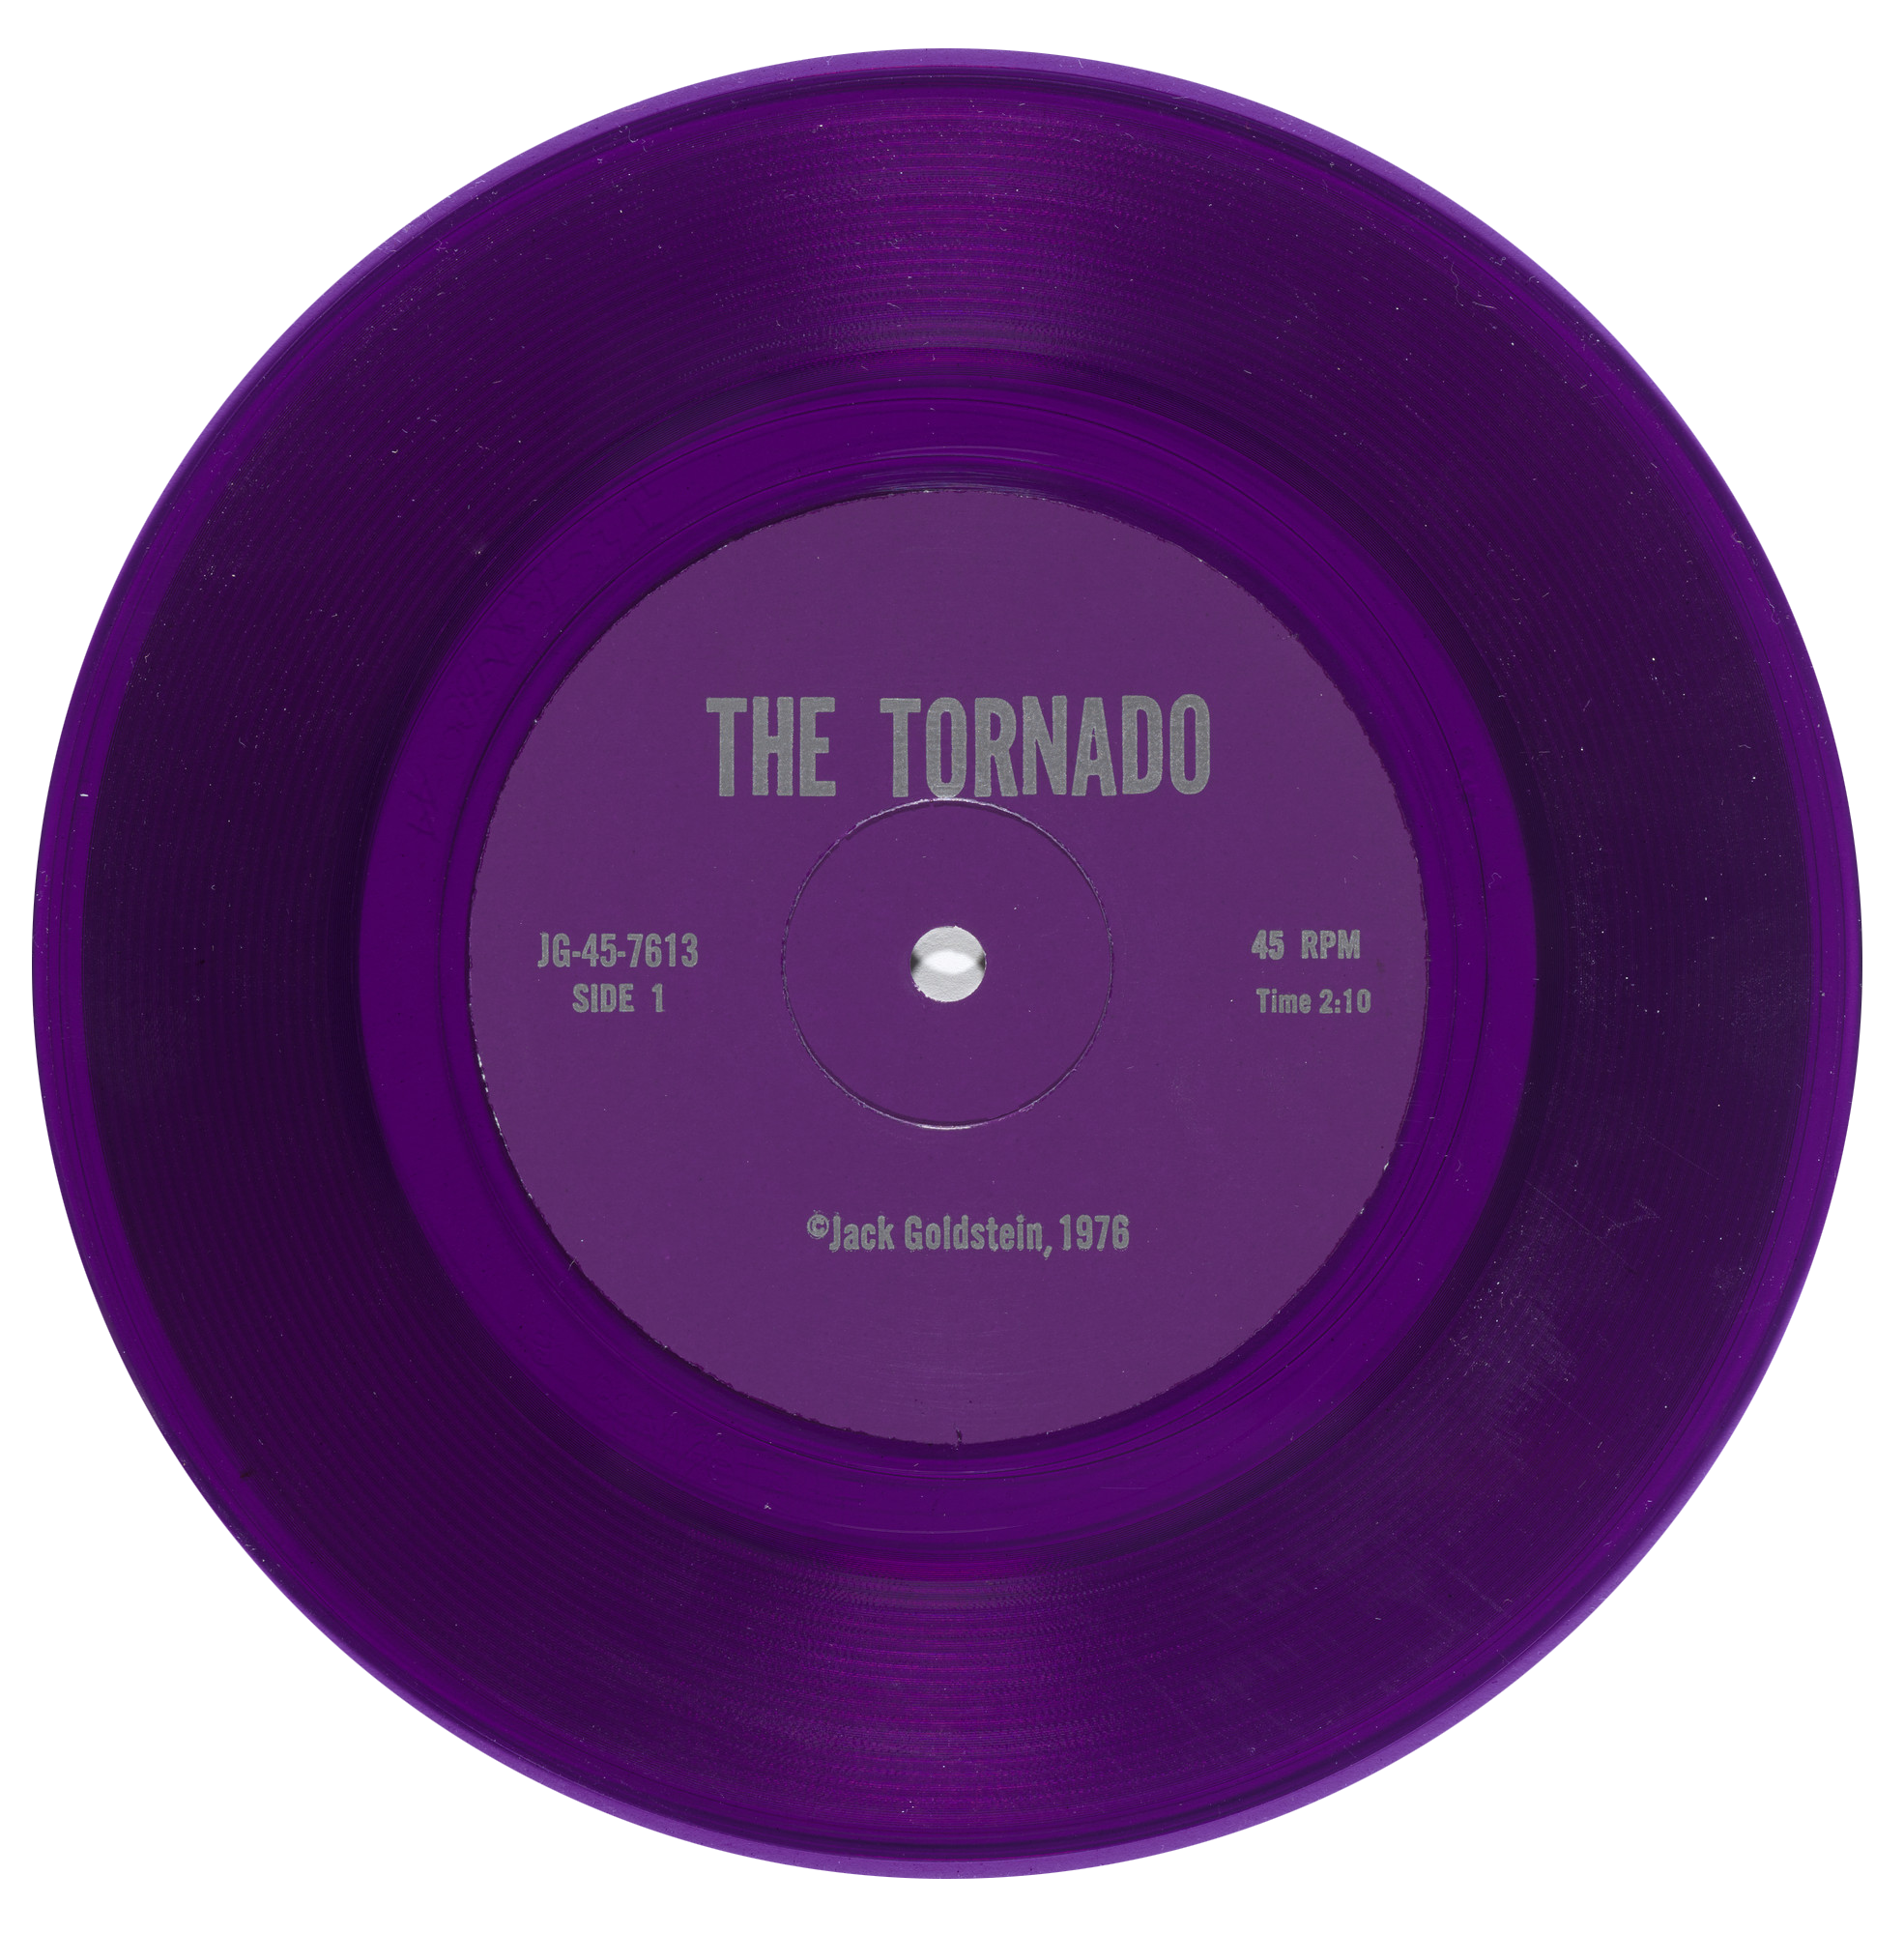  The Tornado
Purple vinyl - 45 rpm 7-inch record

The Tornado is one of the nine components of :
A Suite of Nine 45 rpm 7-Inch Records with Sound Effects
1976